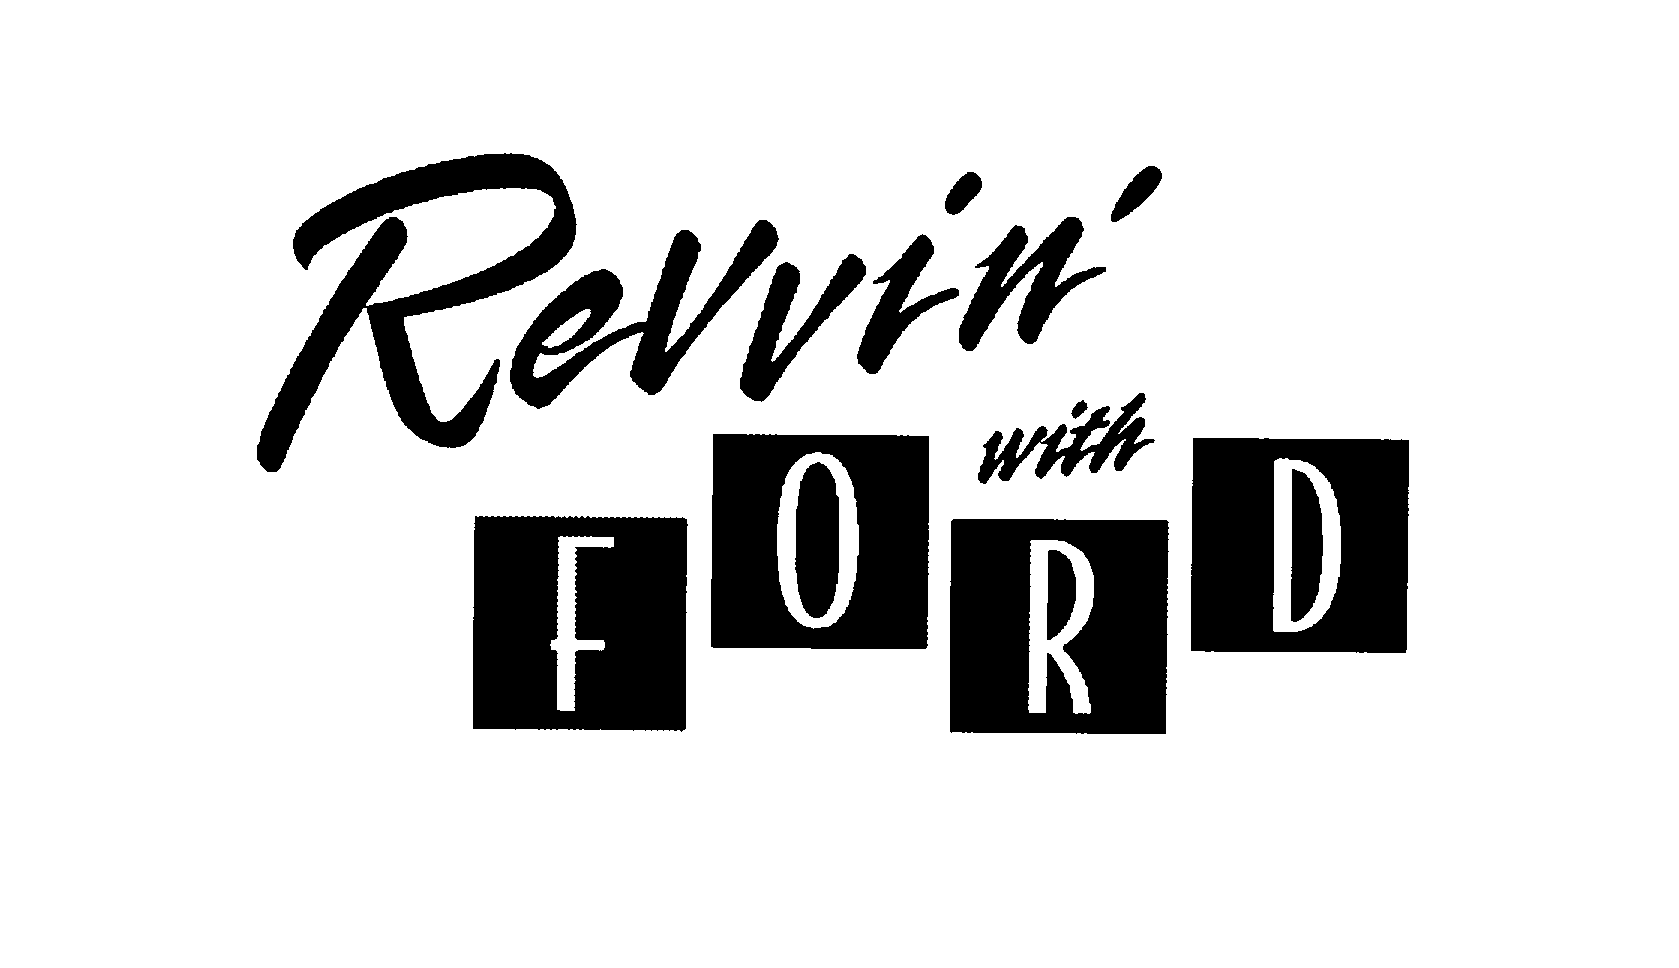 REVVIN' WITH FORD